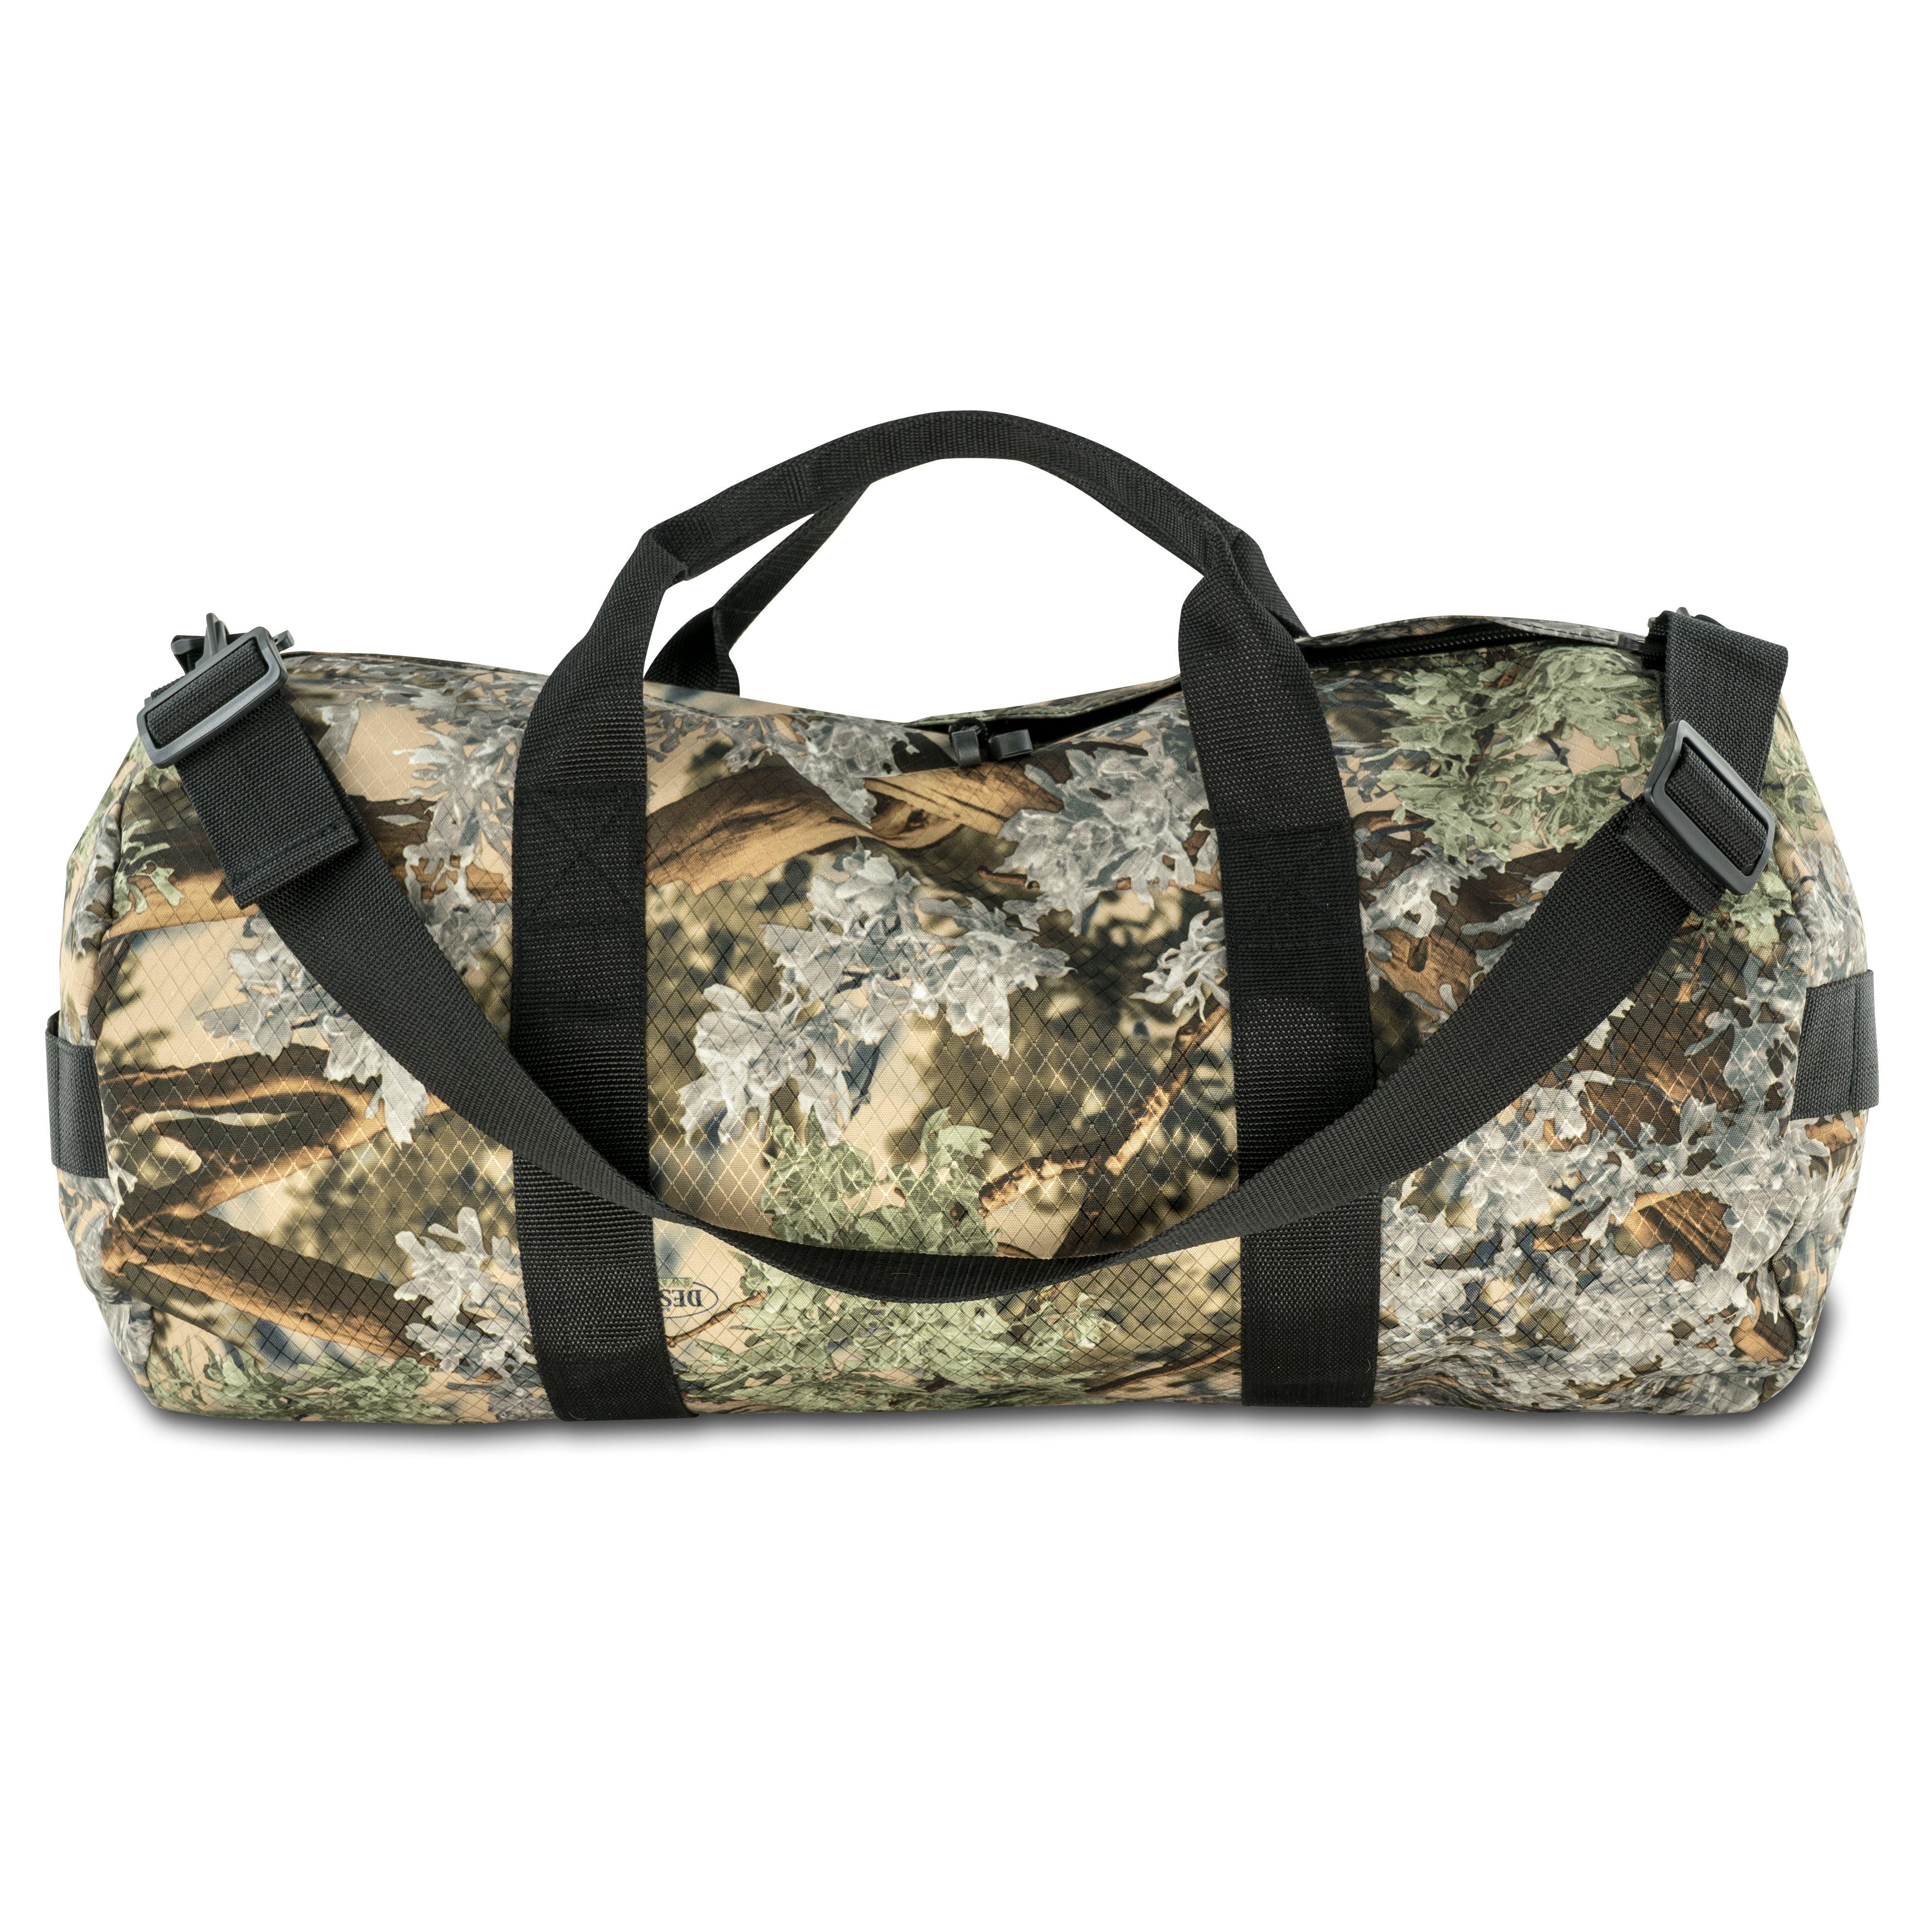 Studio photo of King's Camo Desert Shadow print SD1224DLX Standard Duffle by Northstar Bags. 44 liter duffel with diamond ripstop fabric, thick webbing straps, and a large format metal zipper. Guaranteed for life.